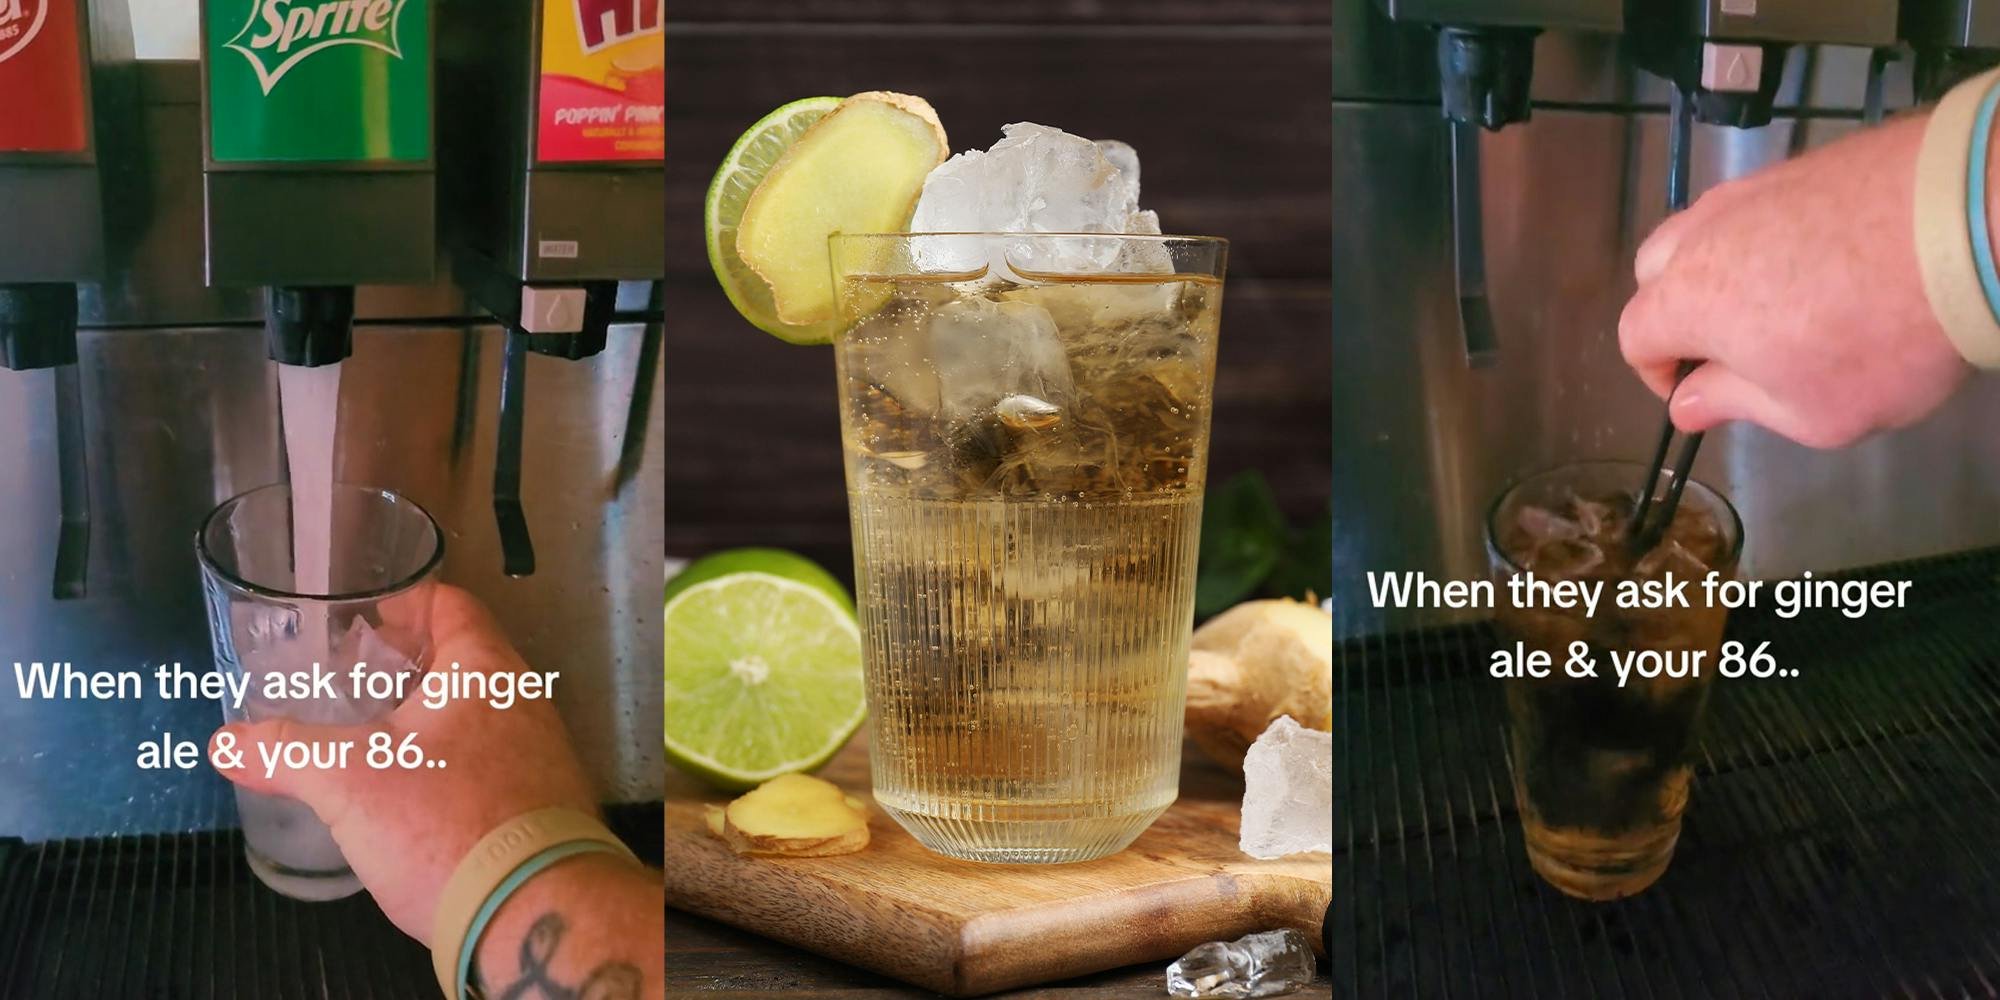 A server shows how they trick customers when ginger ale is out. It backfires